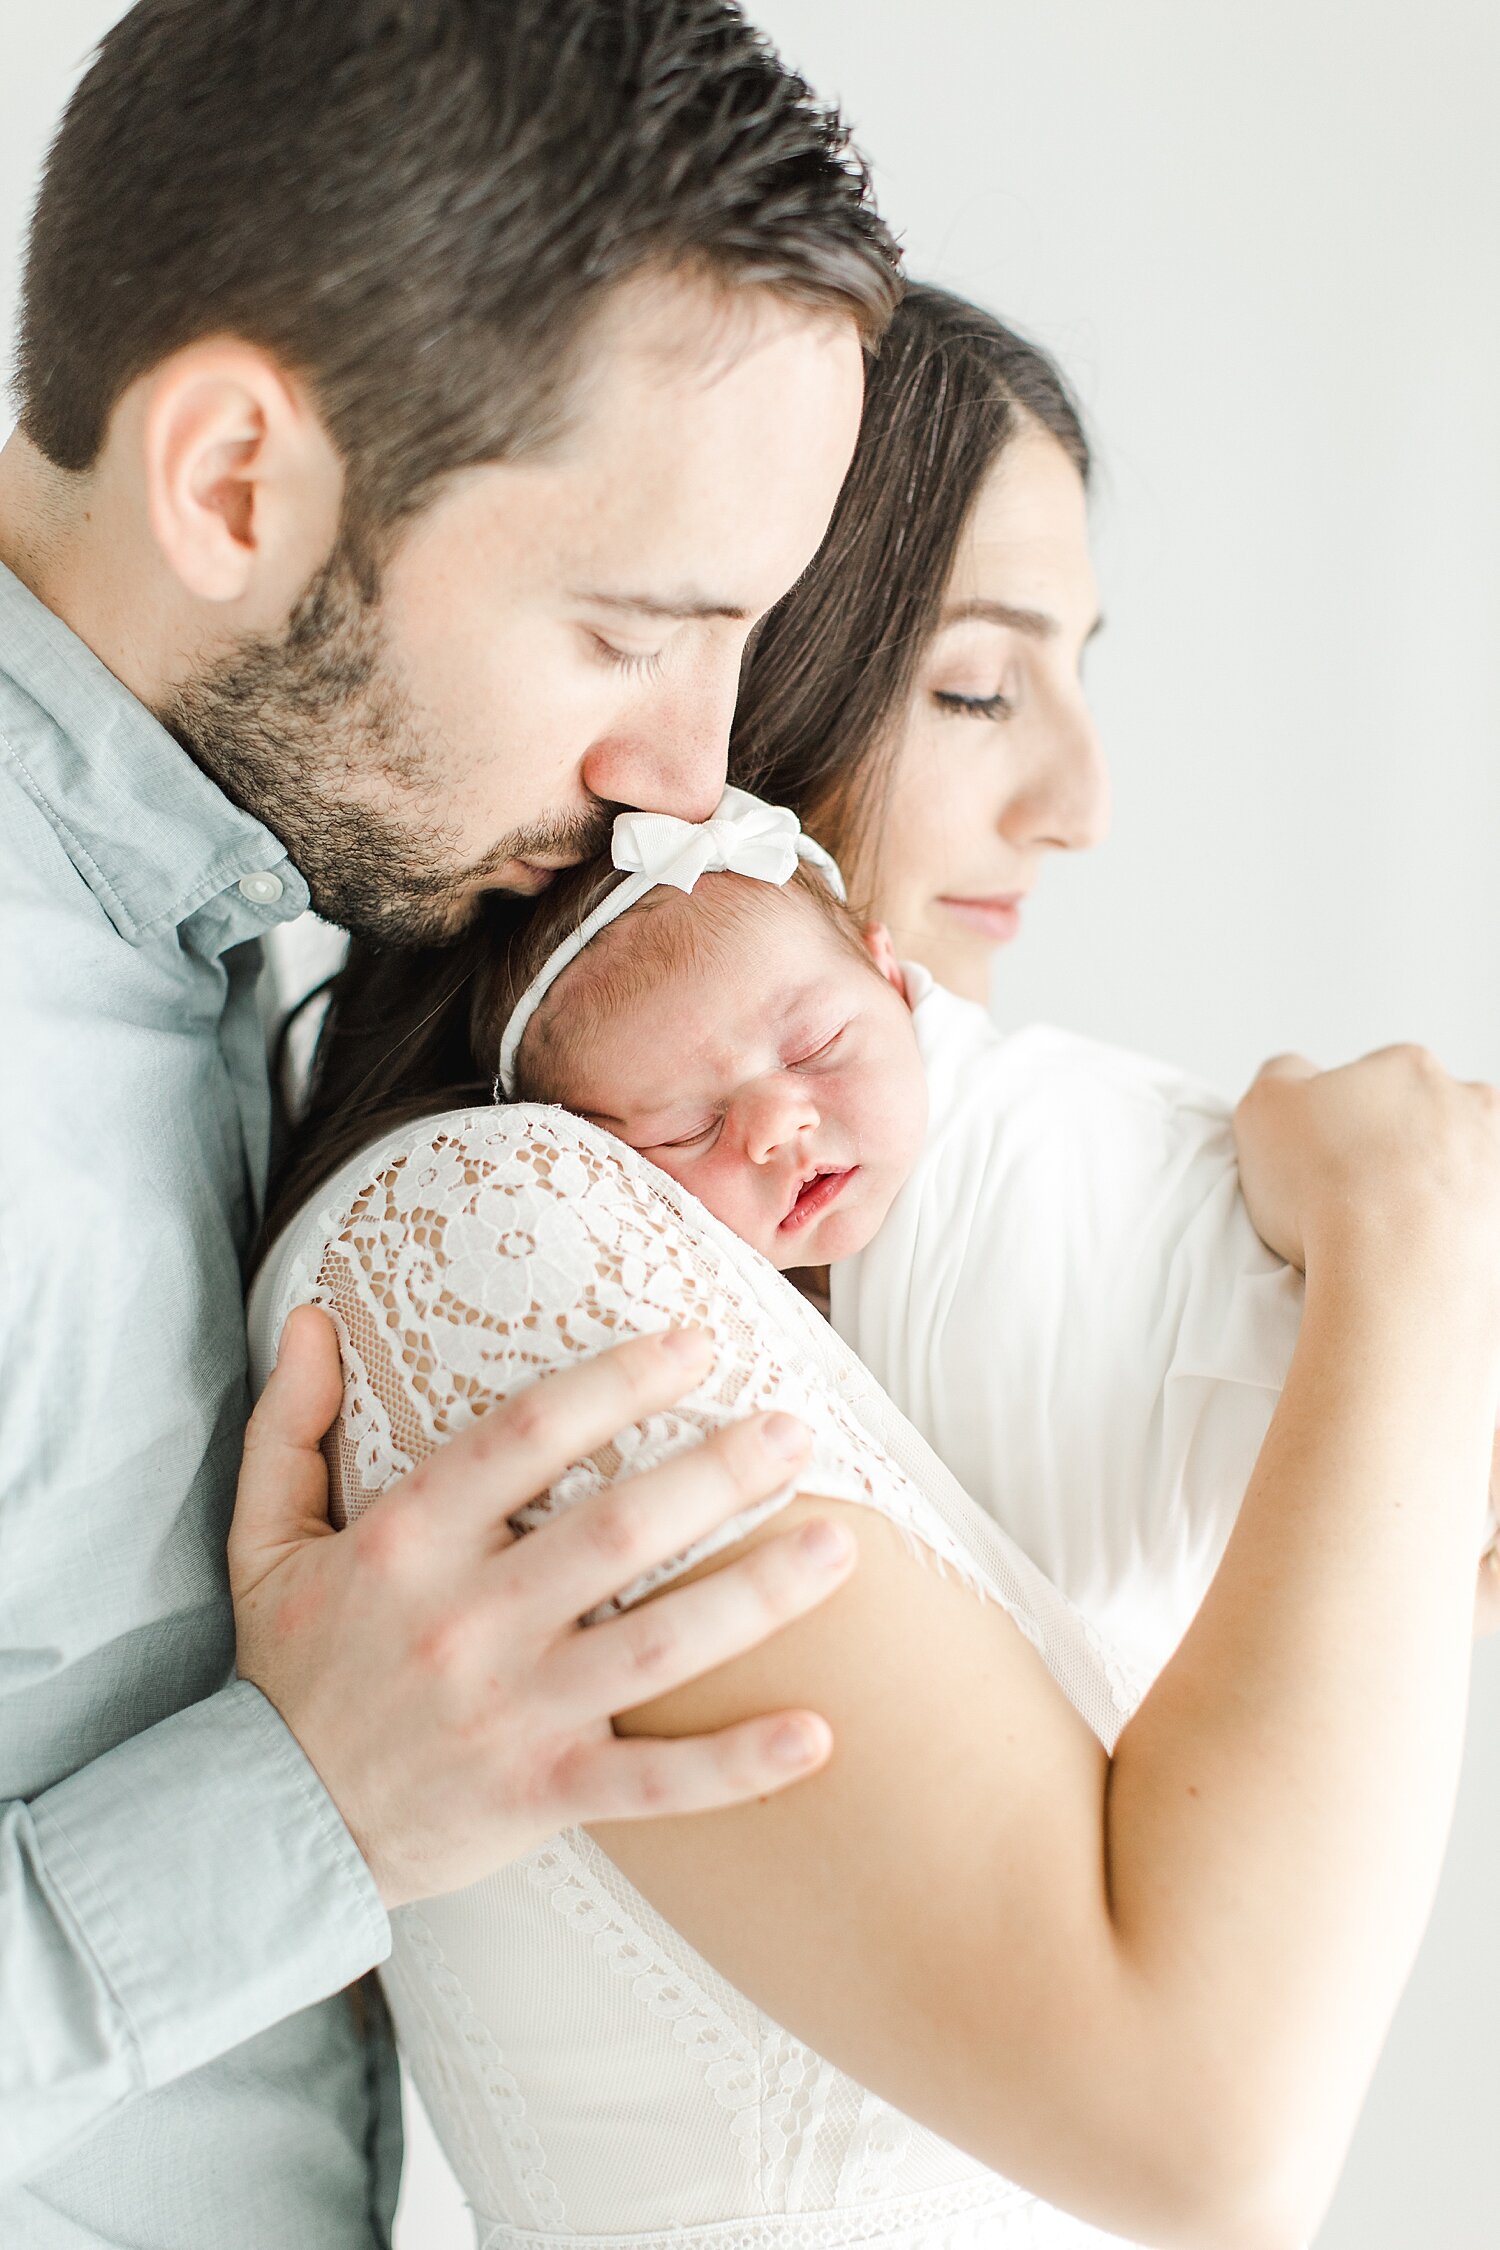 Studio newborn photo of Mom, Dad and their daughter. Photo by Kristin Wood Photography.